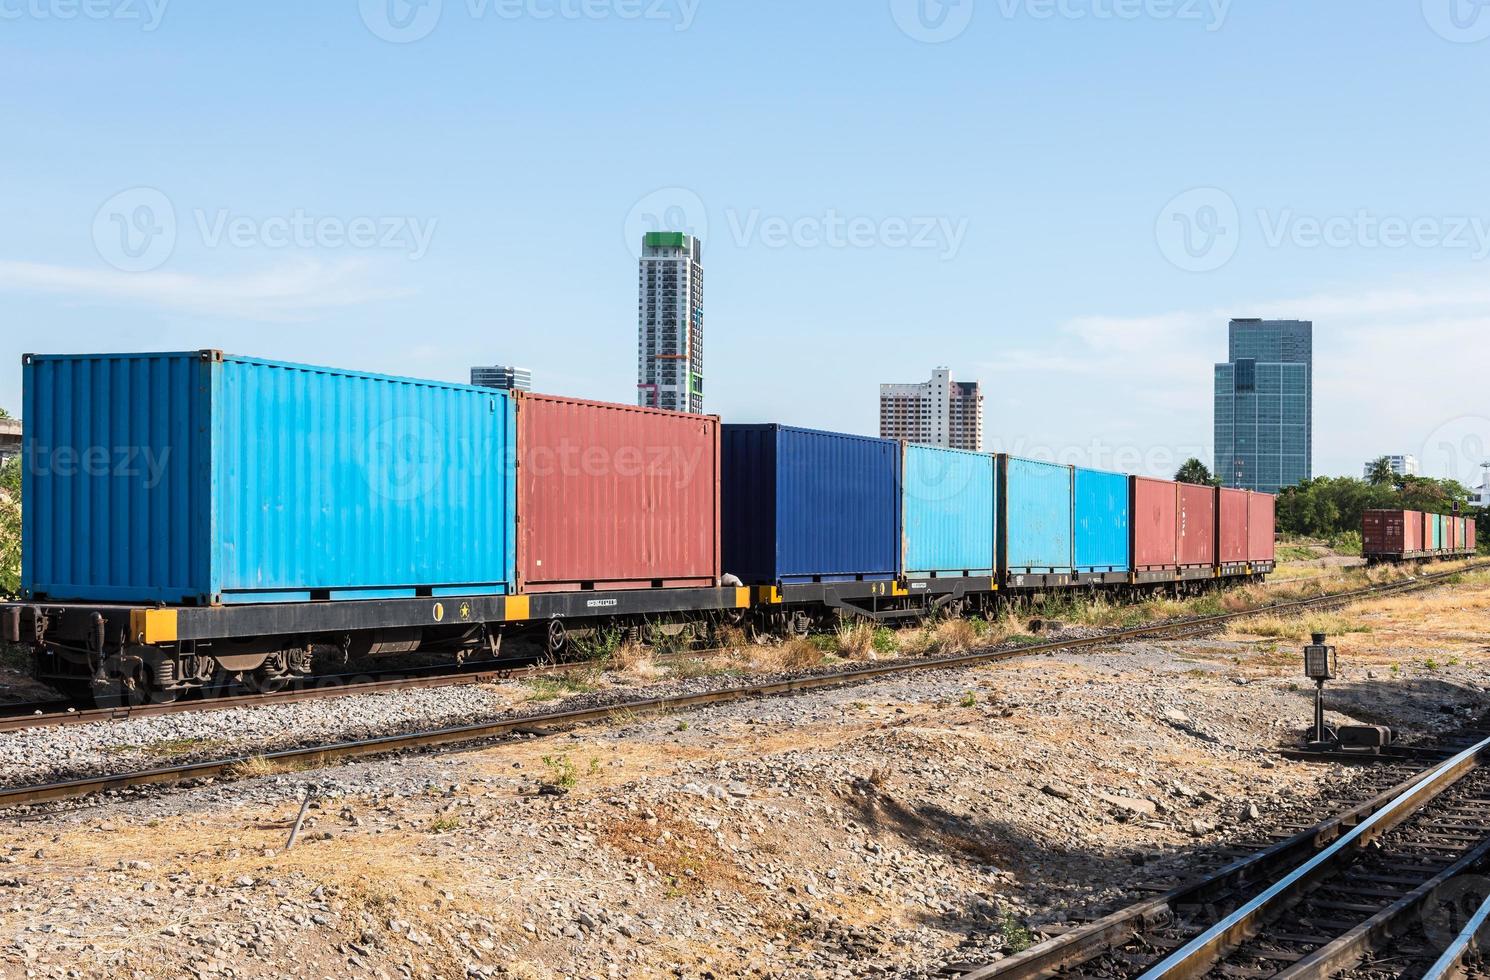 The container wagon photo